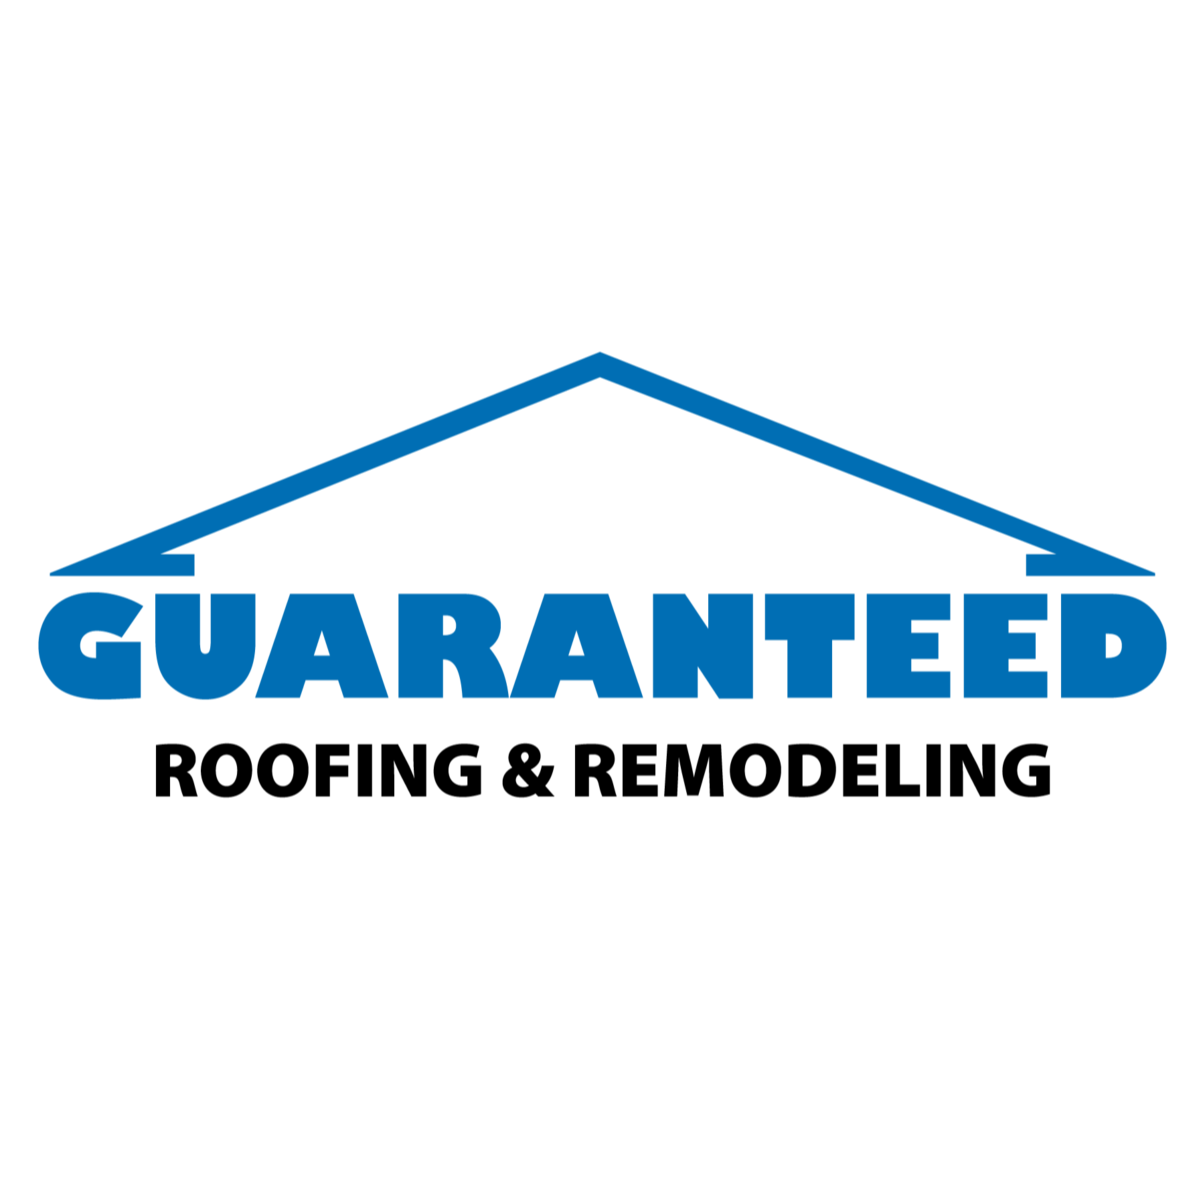 Guaranteed Roofing & Remodeling Logo